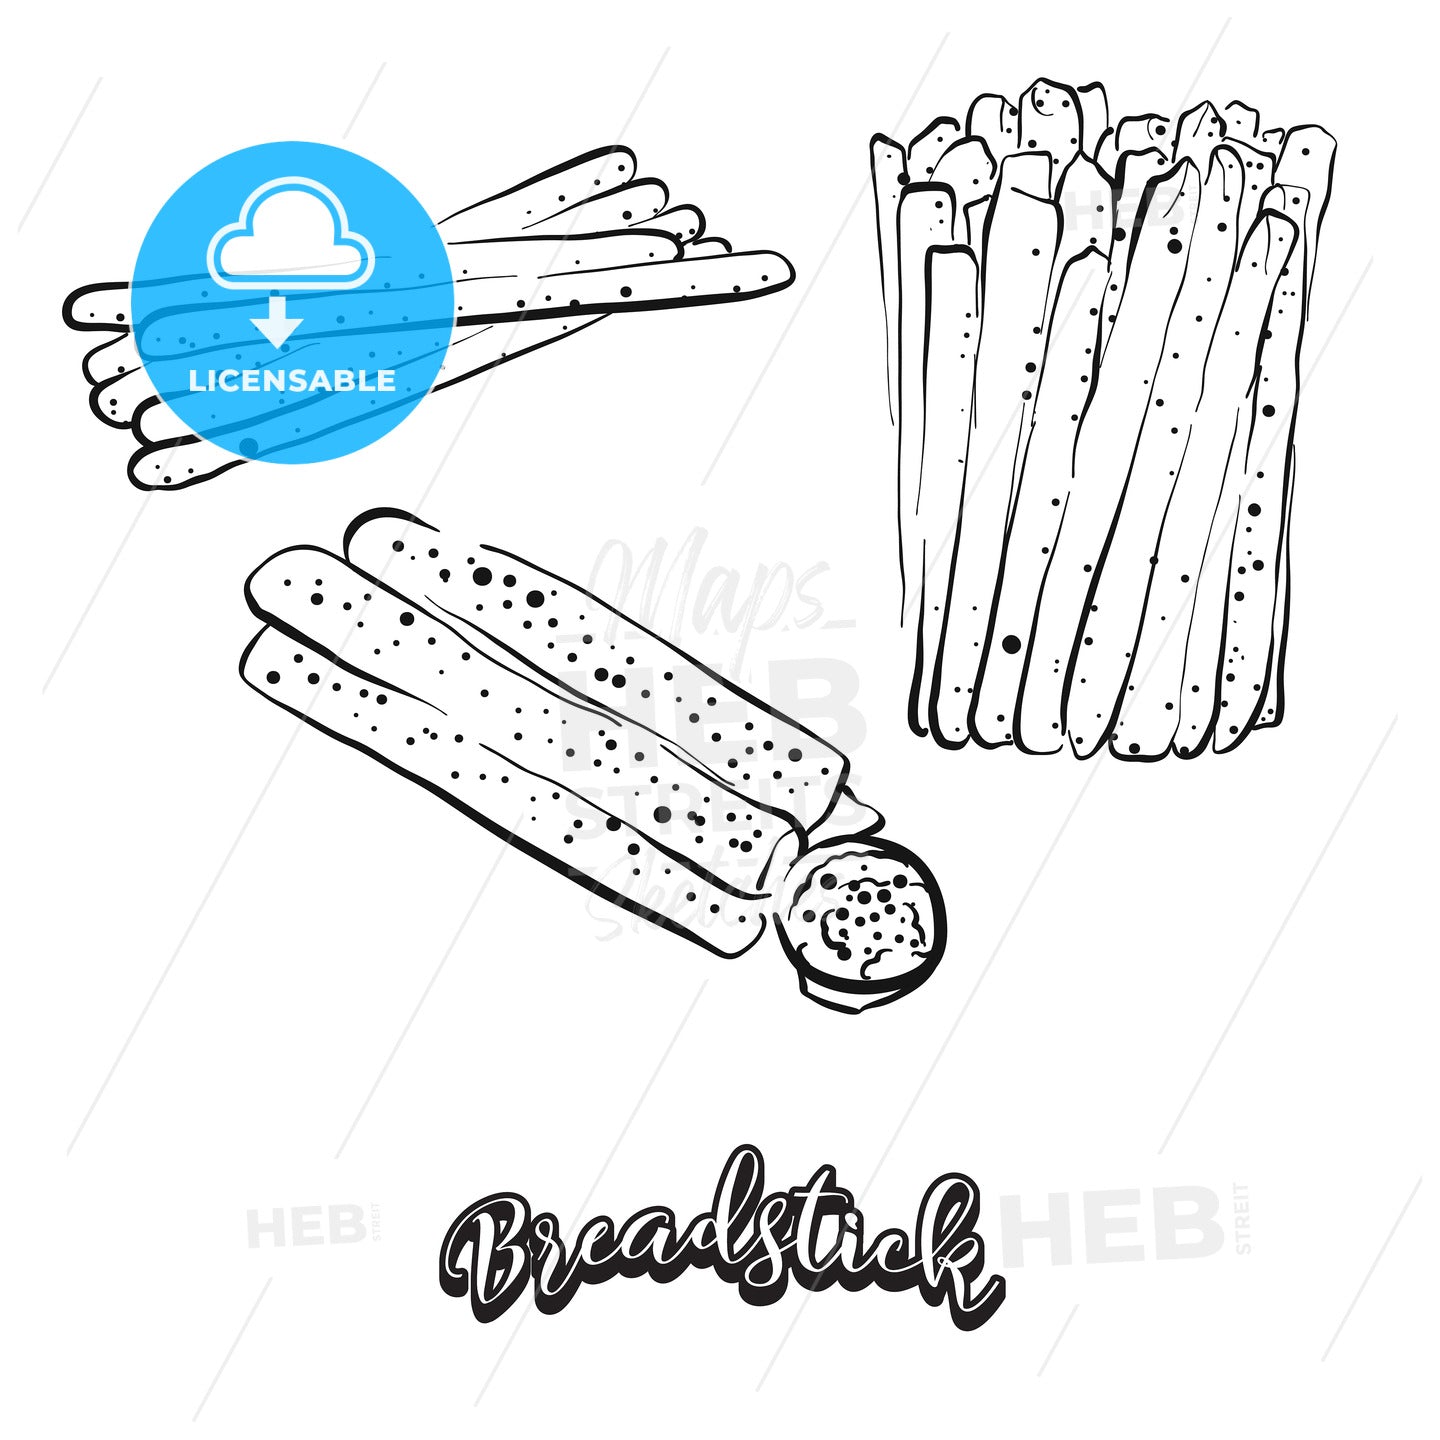 Hand drawn sketch of Breadstick bread – instant download